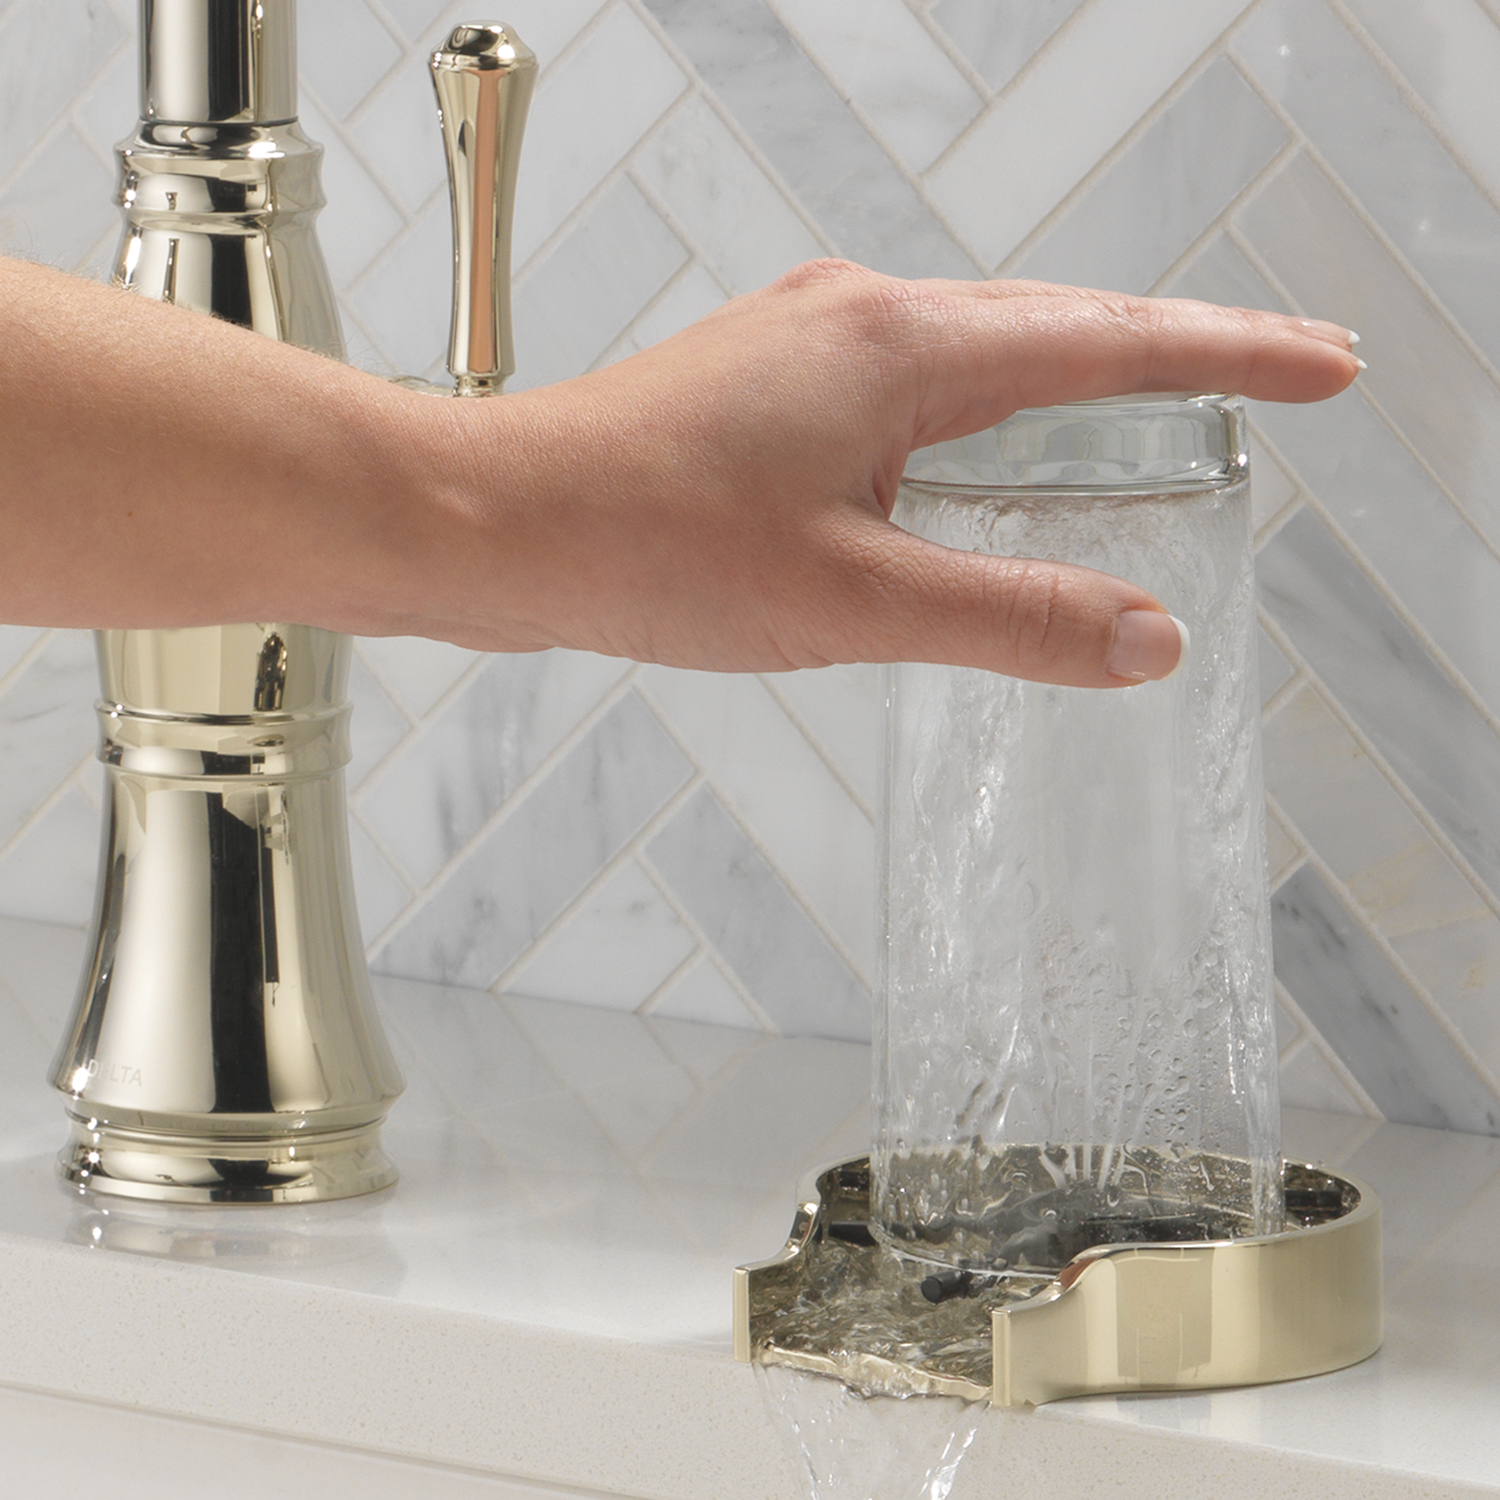 The Delta® Glass Rinser thoroughly rinses residue in seconds, with high-pressure water jets that reach where you can’t. Their sleek, low-profile design allows them to pair seamlessly with any faucet in any room style. It includes cover accessory to help prevent accidental water spray, thus protecting your elegant kitchen design.